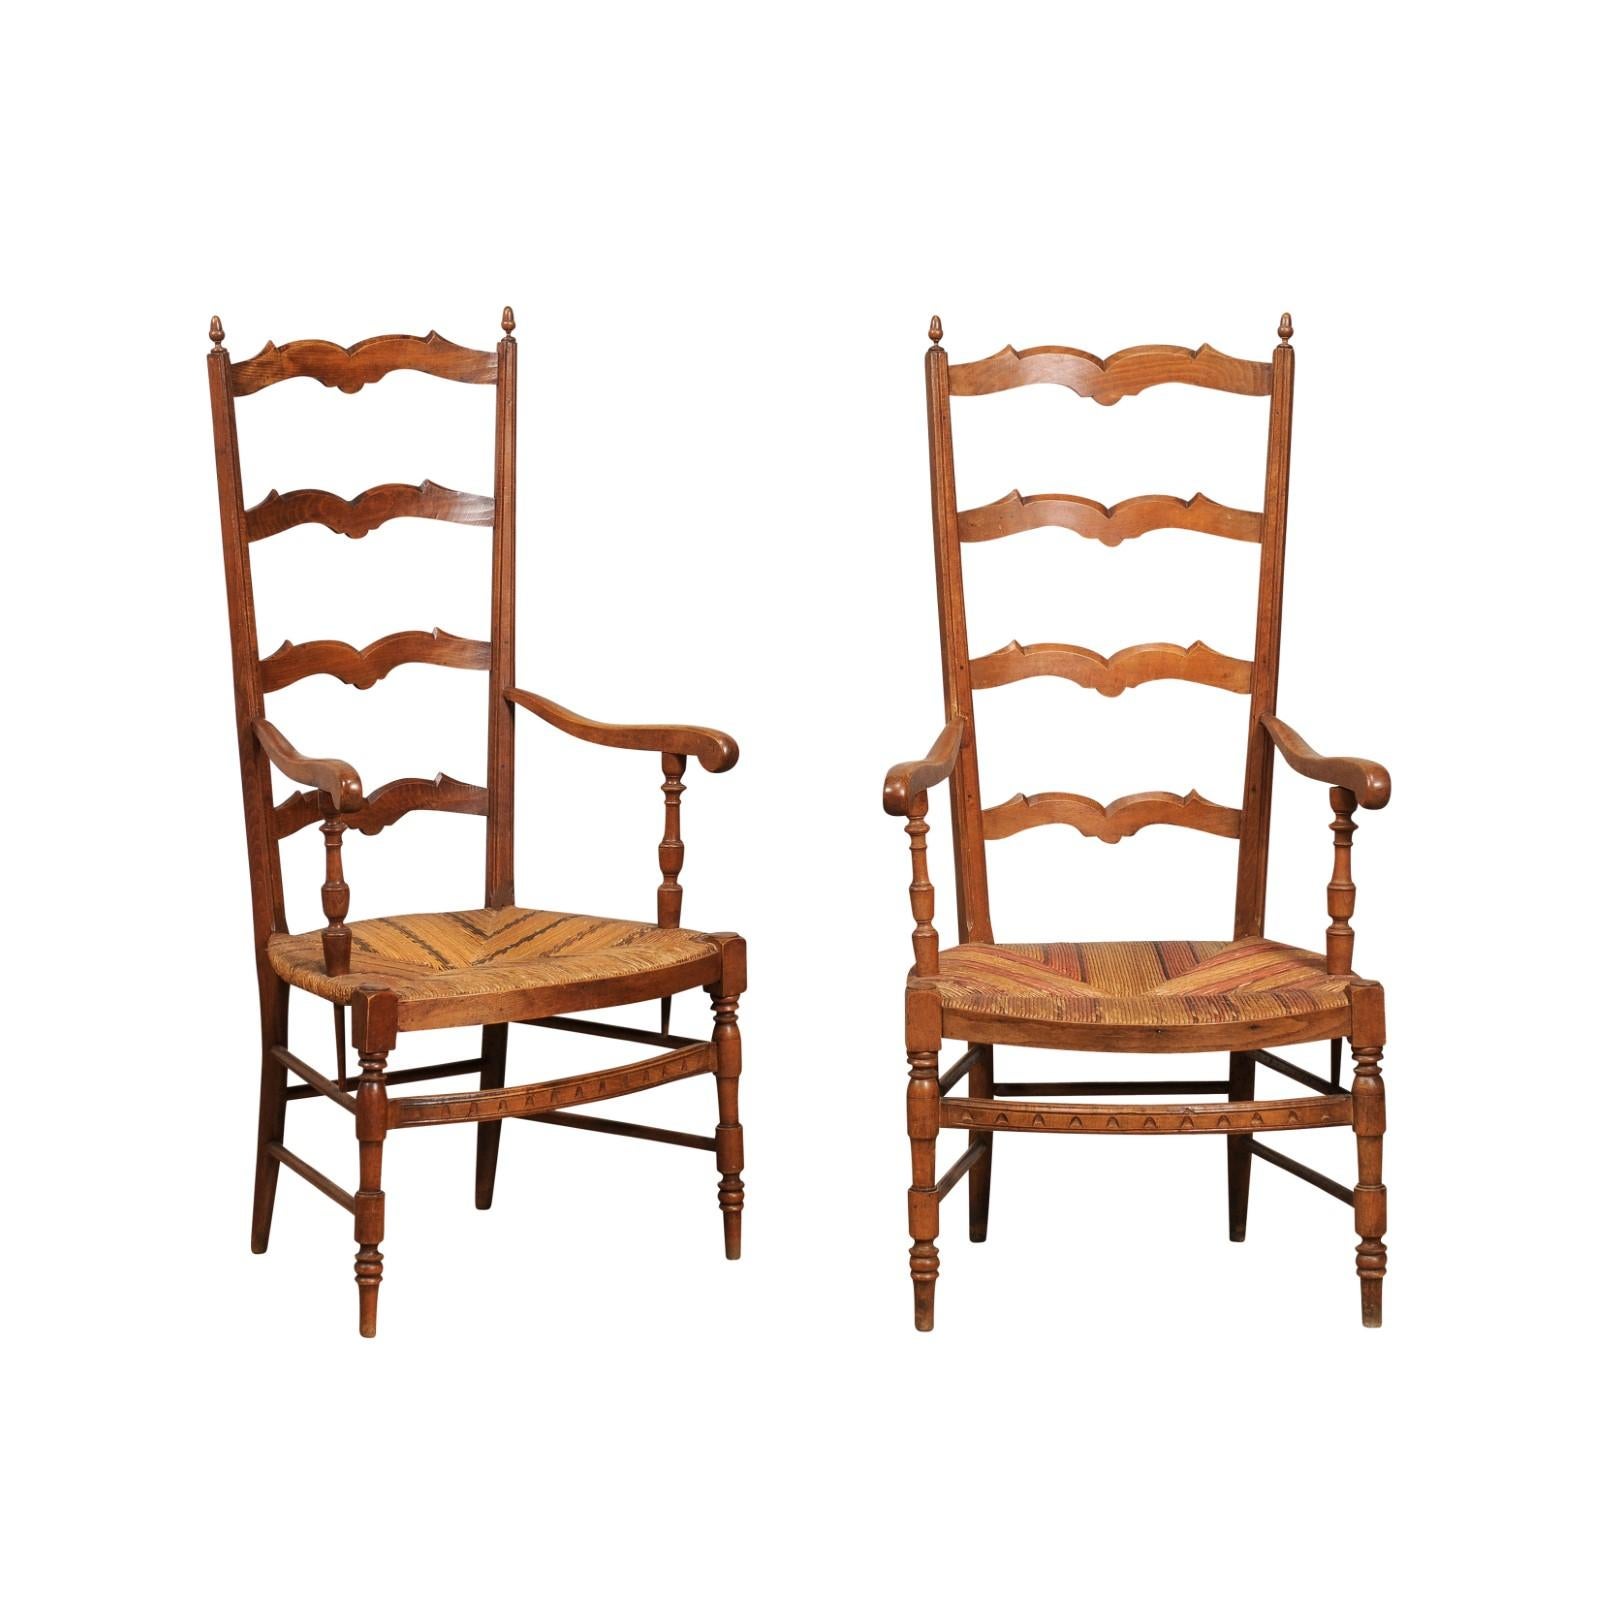 A pair of French fruitwood ladder back chairs from circa 1890 with woven straw seats, turned legs and bow arched bars. Embrace the rustic charm and timeless elegance of these French fruitwood ladder back chairs from circa 1890. Their honeyed tones,